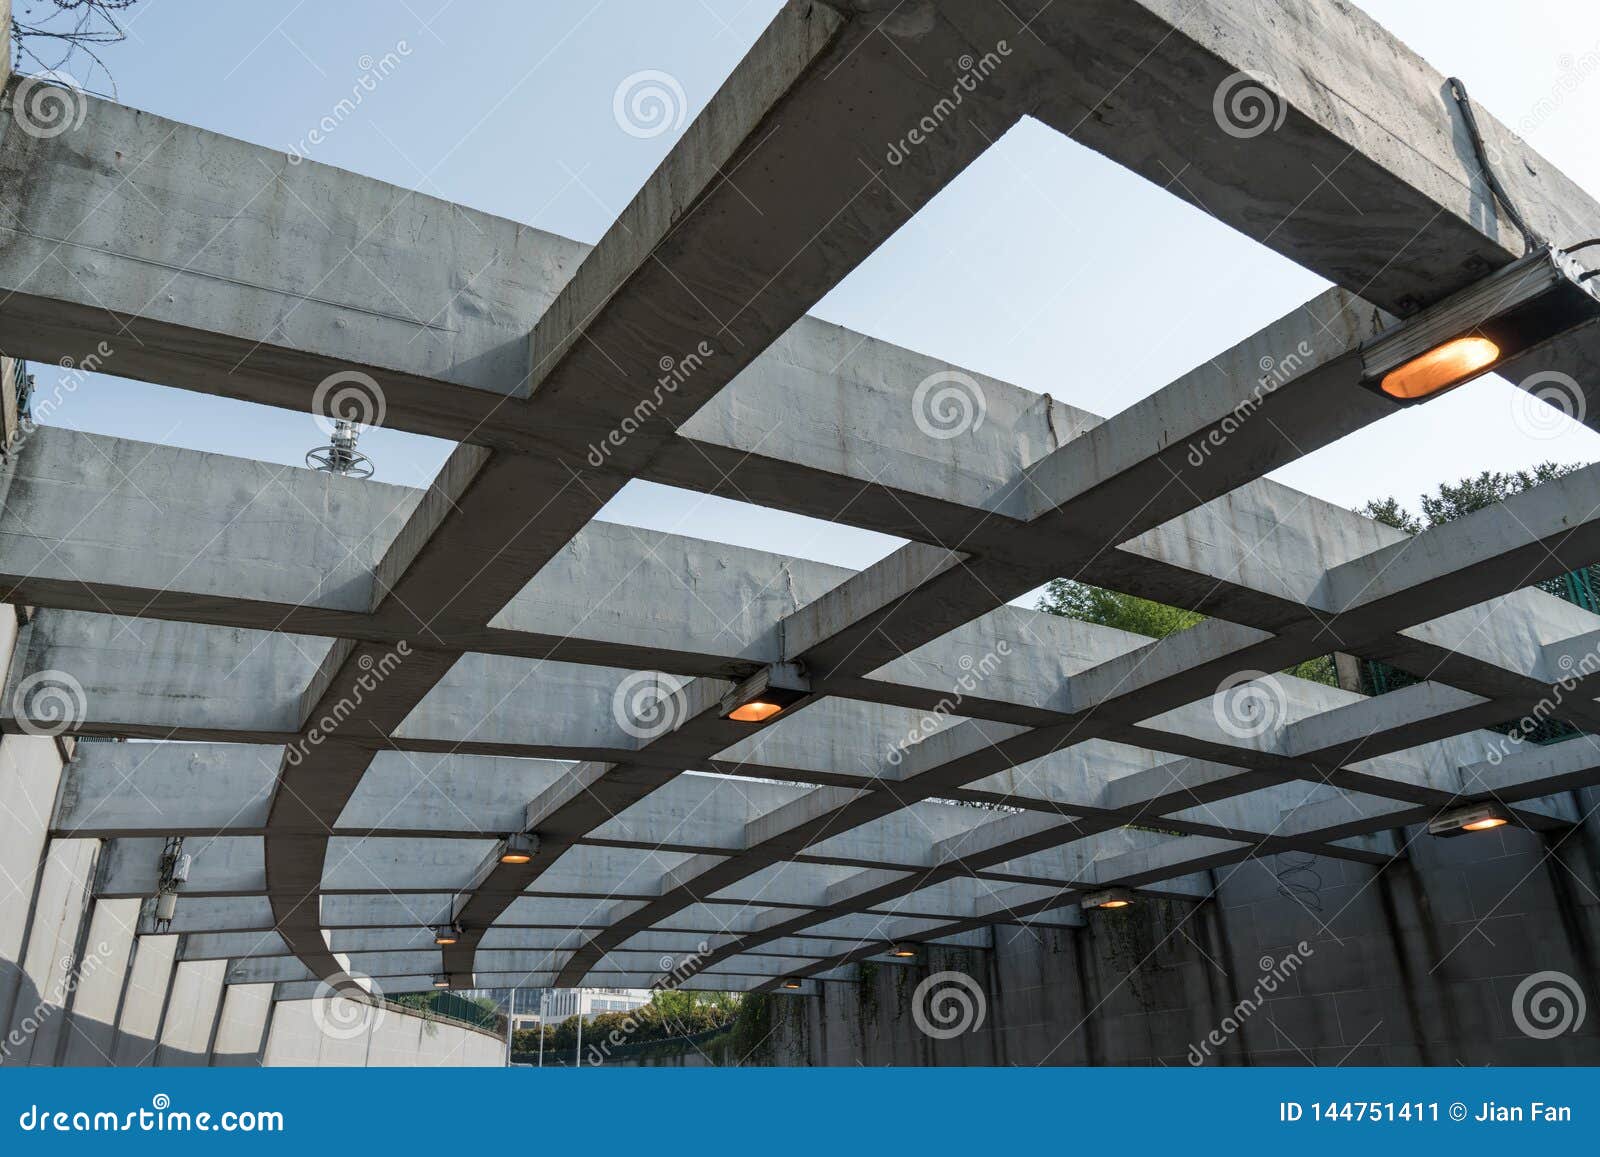 The Passageway In The City Perspective Background Stock Image Image Of City Portal 144751411